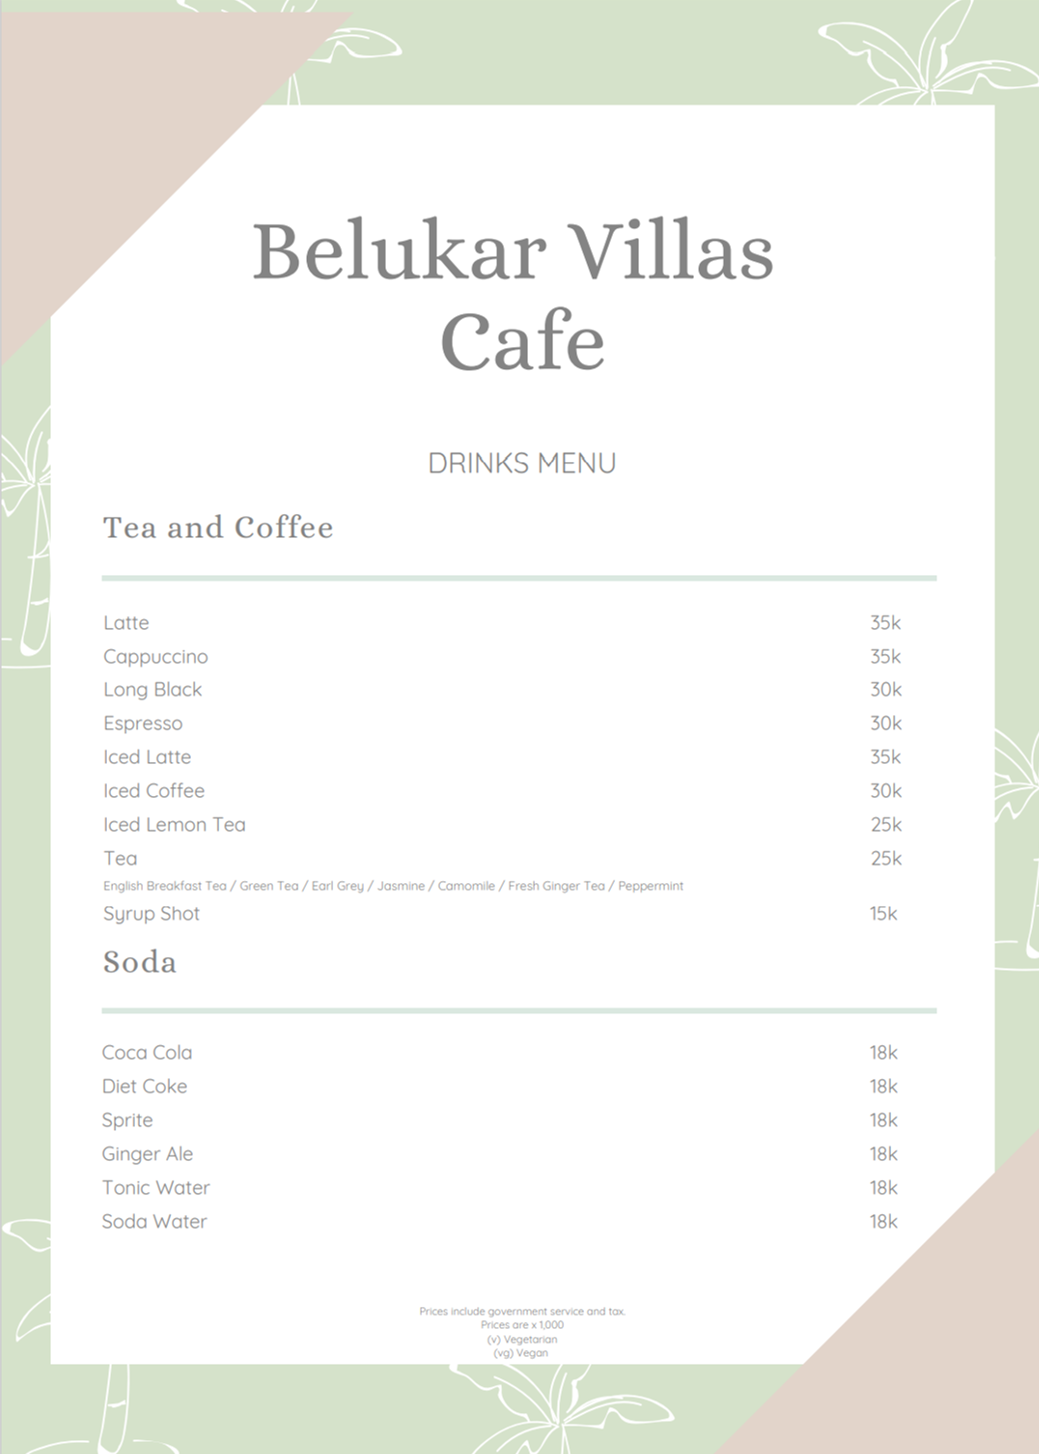 https://cloudmixer.gracepl.us/sites/belukarvillas.com/files/pictures/Cafe%20and%20menu/Cafe%20page%203.png